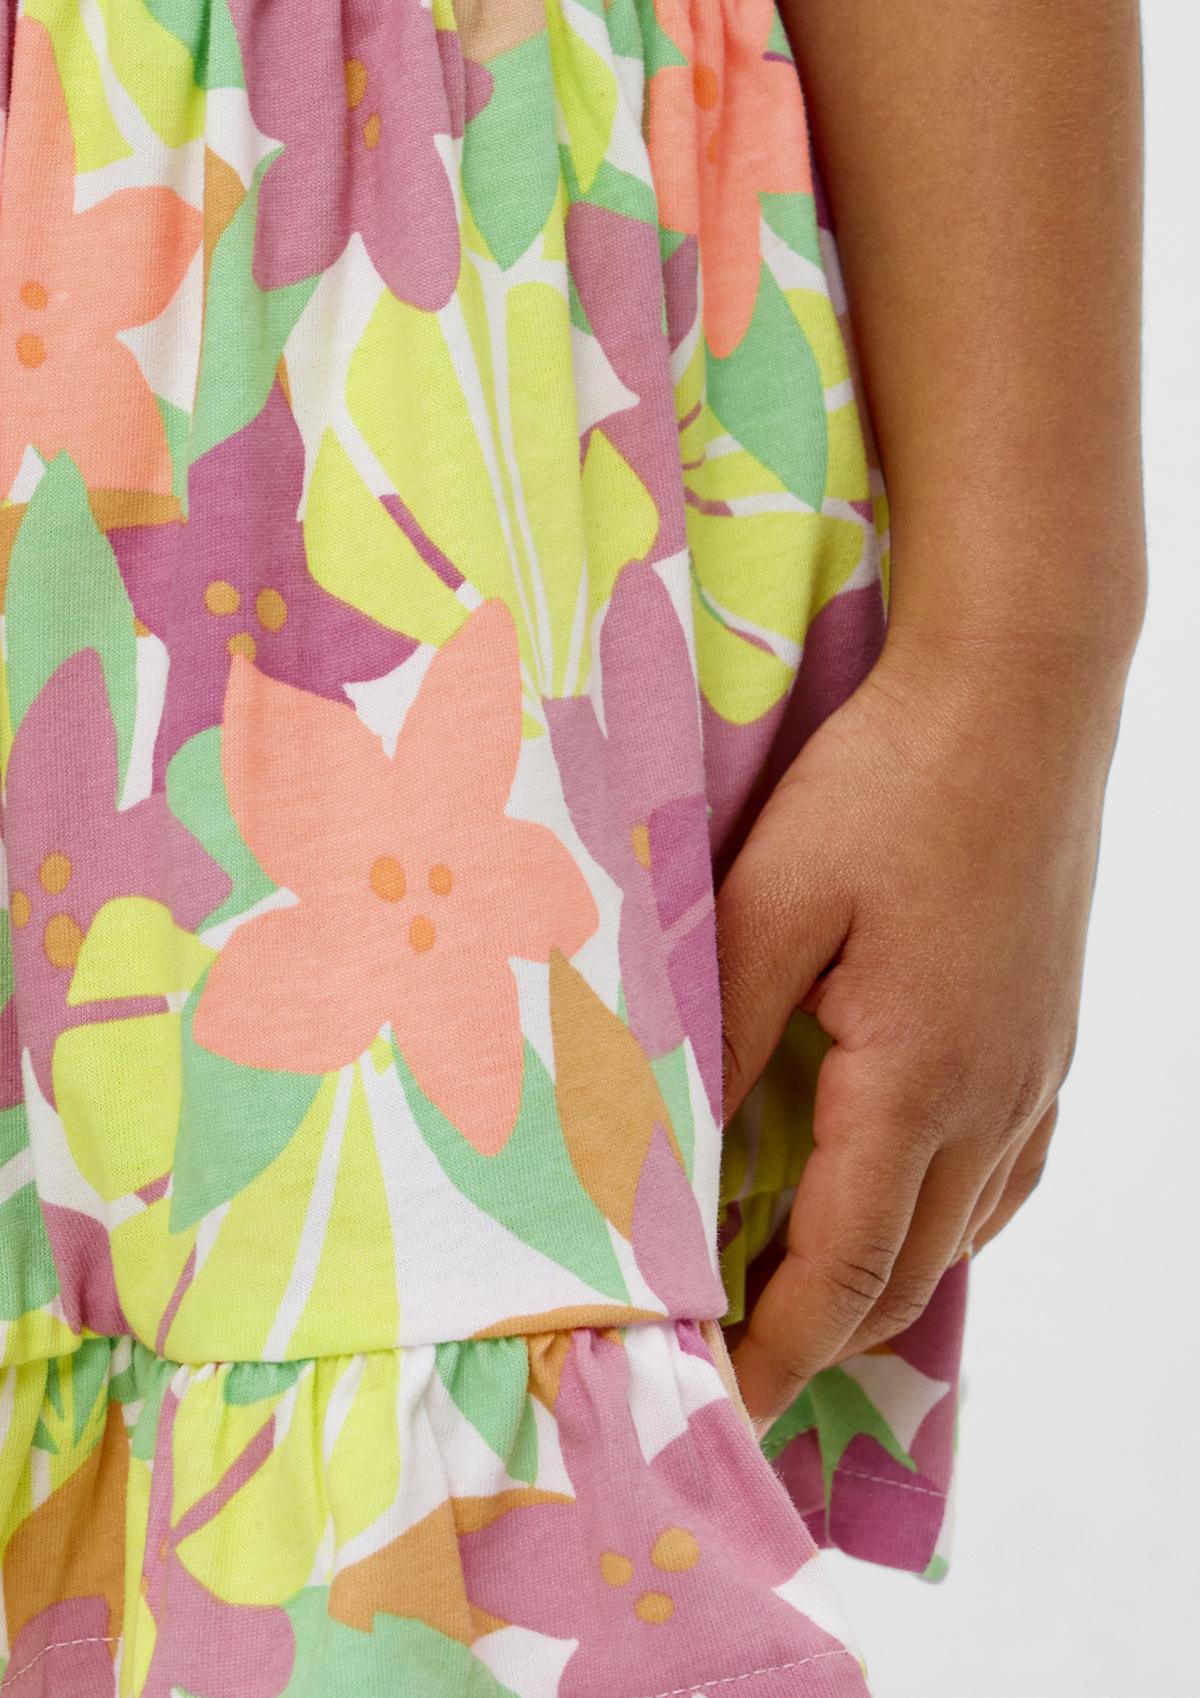 s.Oliver Skirt with a width-adjustable waistband